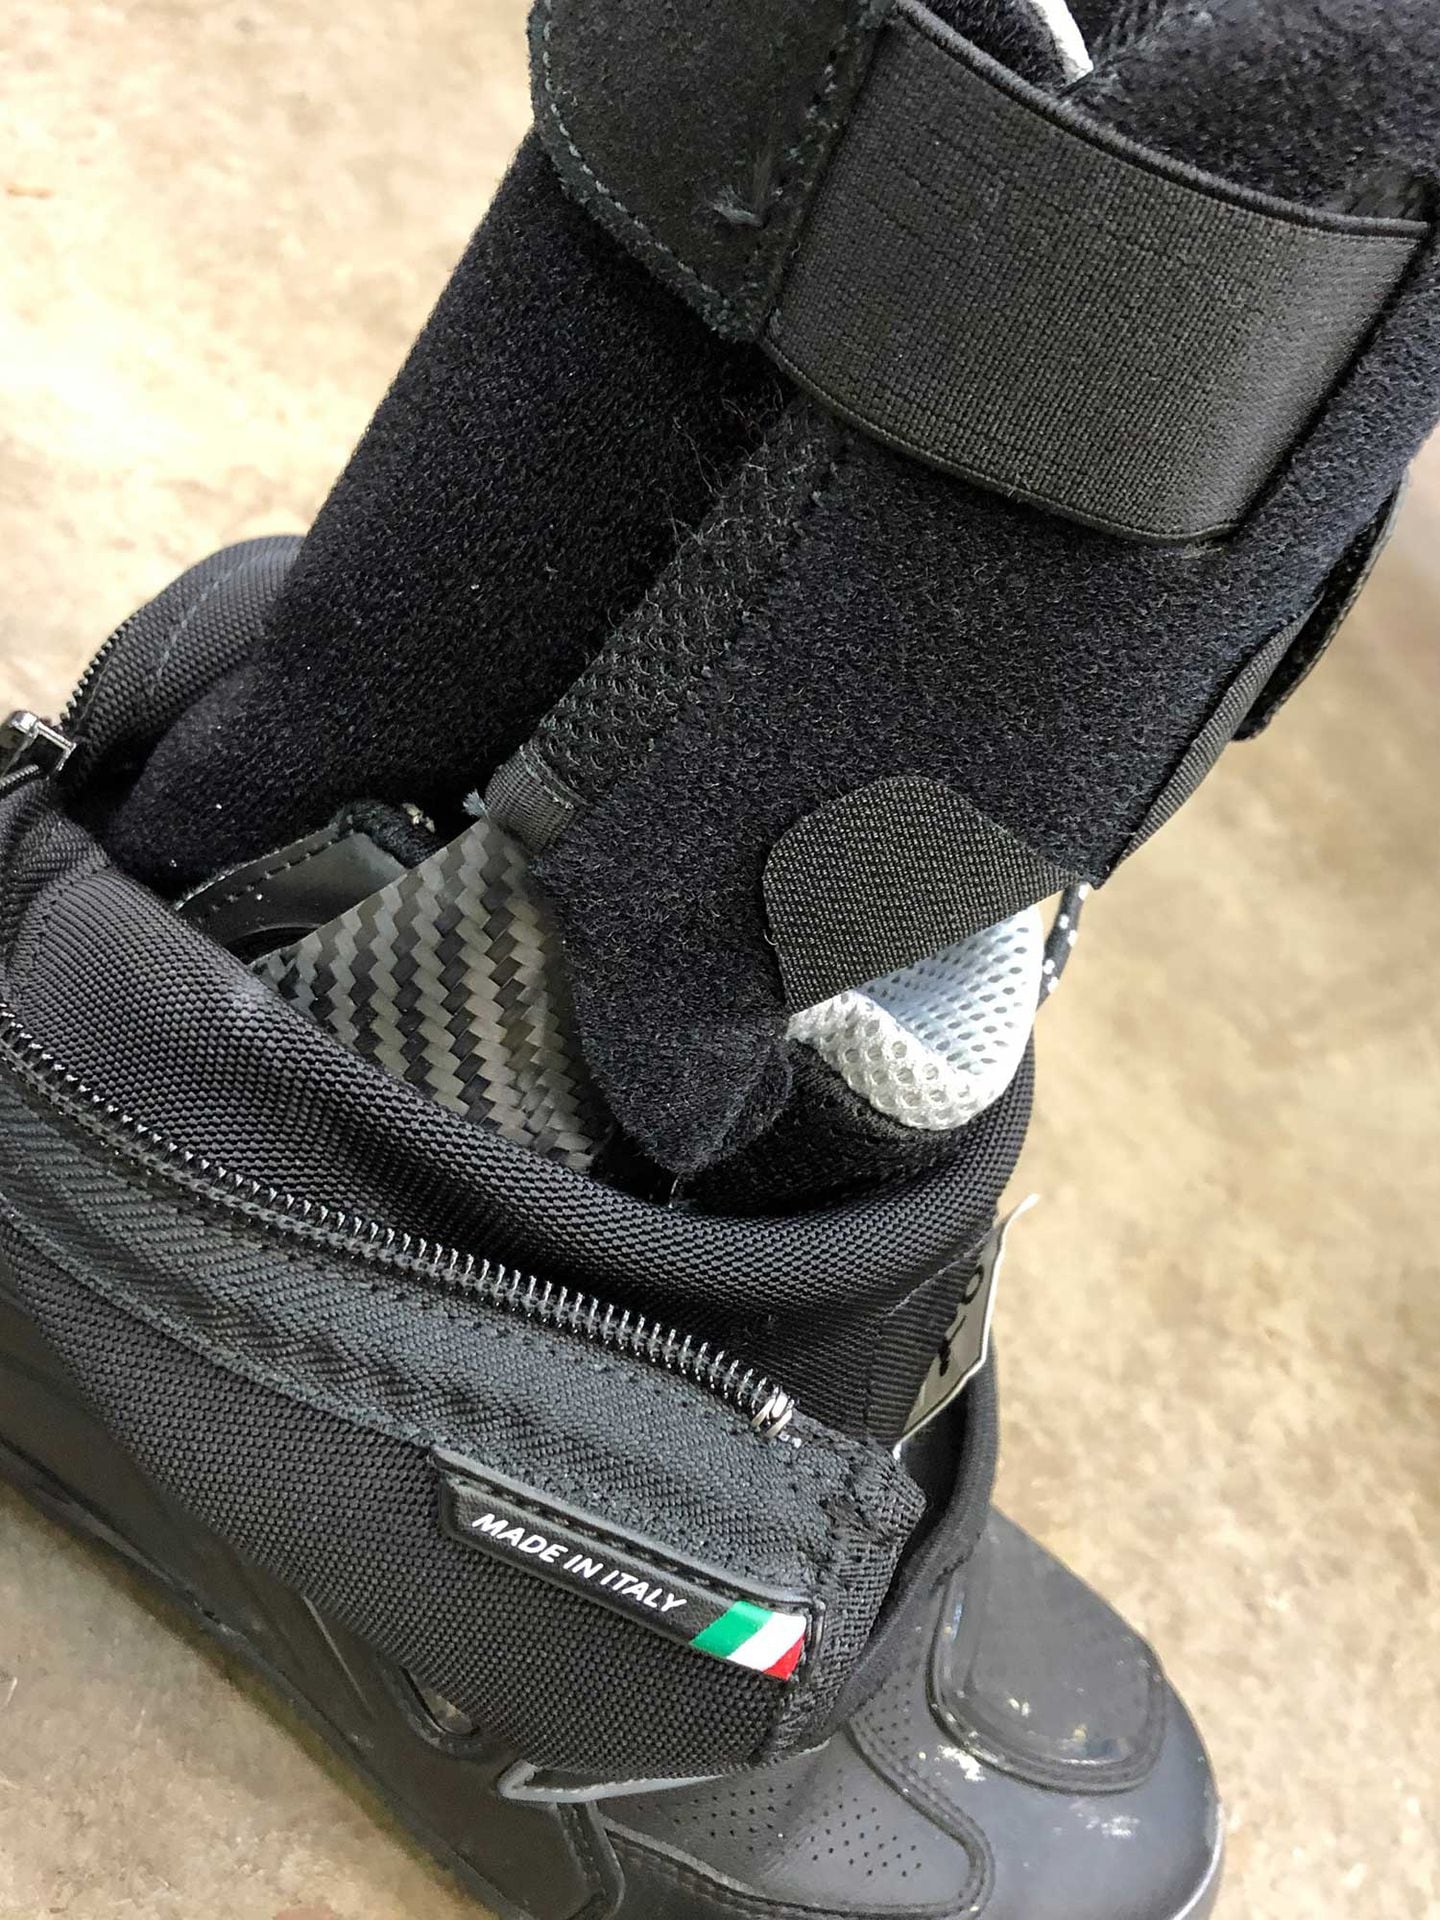 Dainese Axial D1 Boot Review | Cycle World